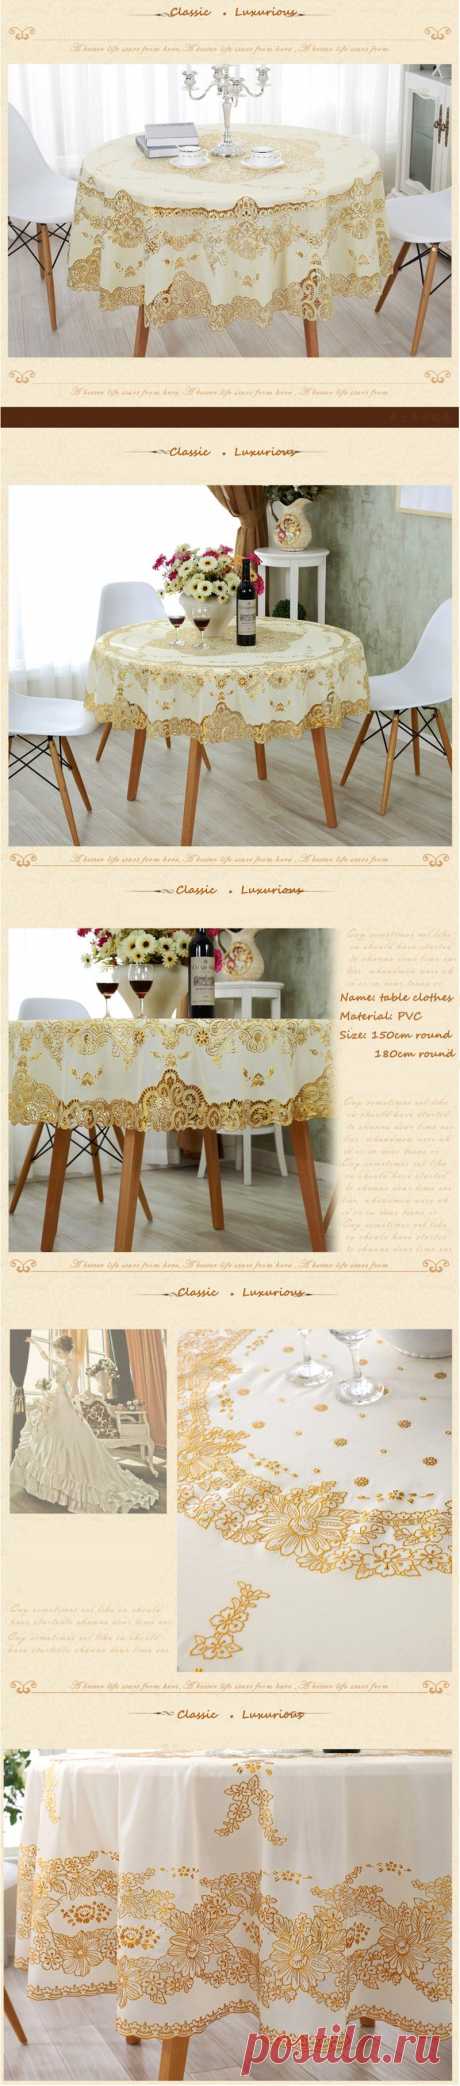 Aliexpress.com : Buy Home Table Cup Mat Creative Decor Coffee Drink Placemat Table Cloth Tablecloth Table Cover High Quality Europe Style from Reliable cloth drying suppliers on The perfect pair | Alibaba Group